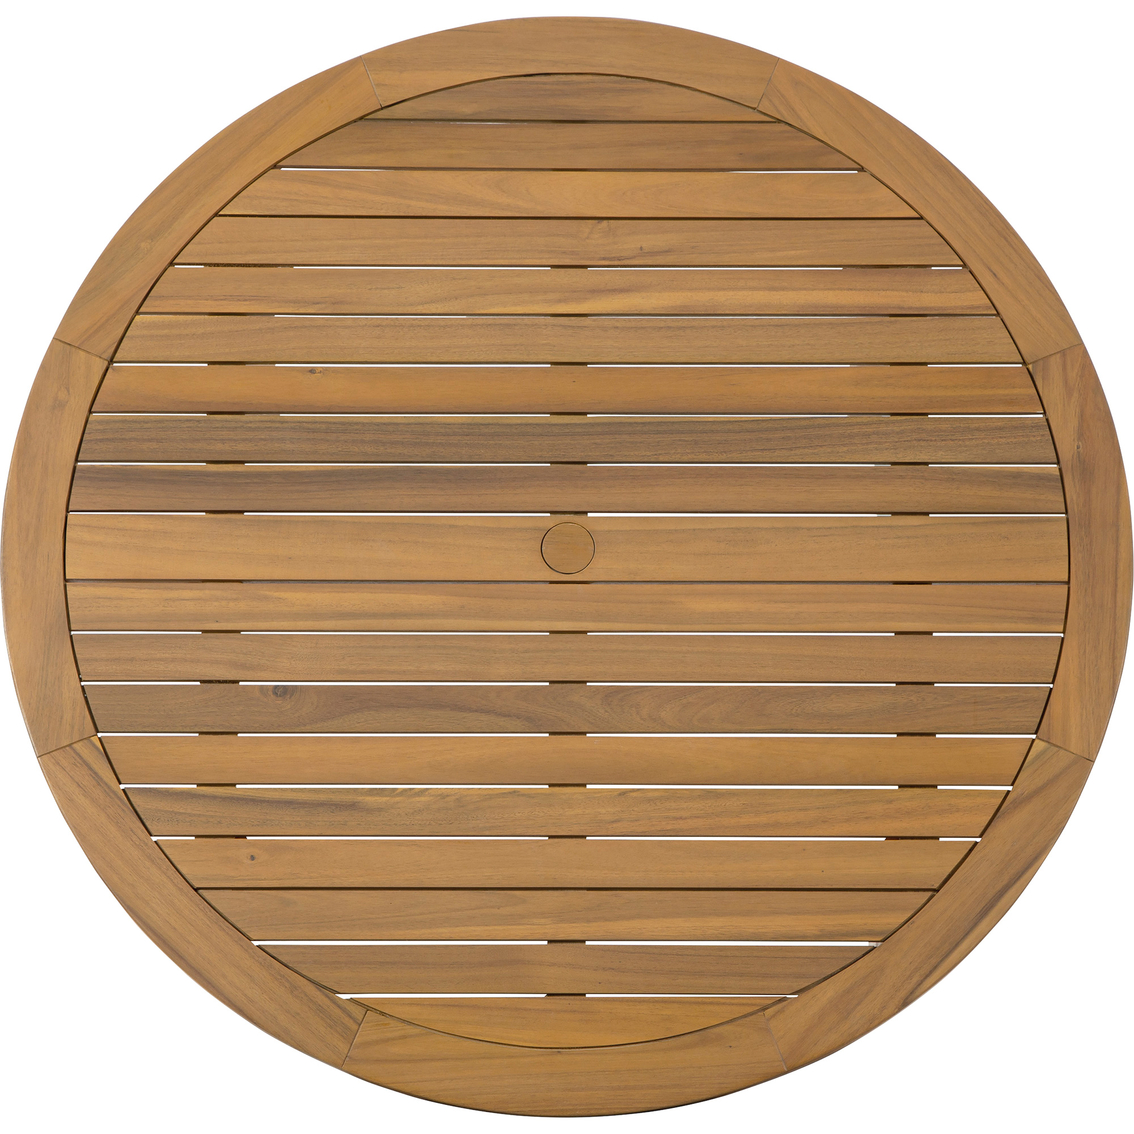 Signature Design by Ashley Janiyah Outdoor Round Dining Table - Image 3 of 6